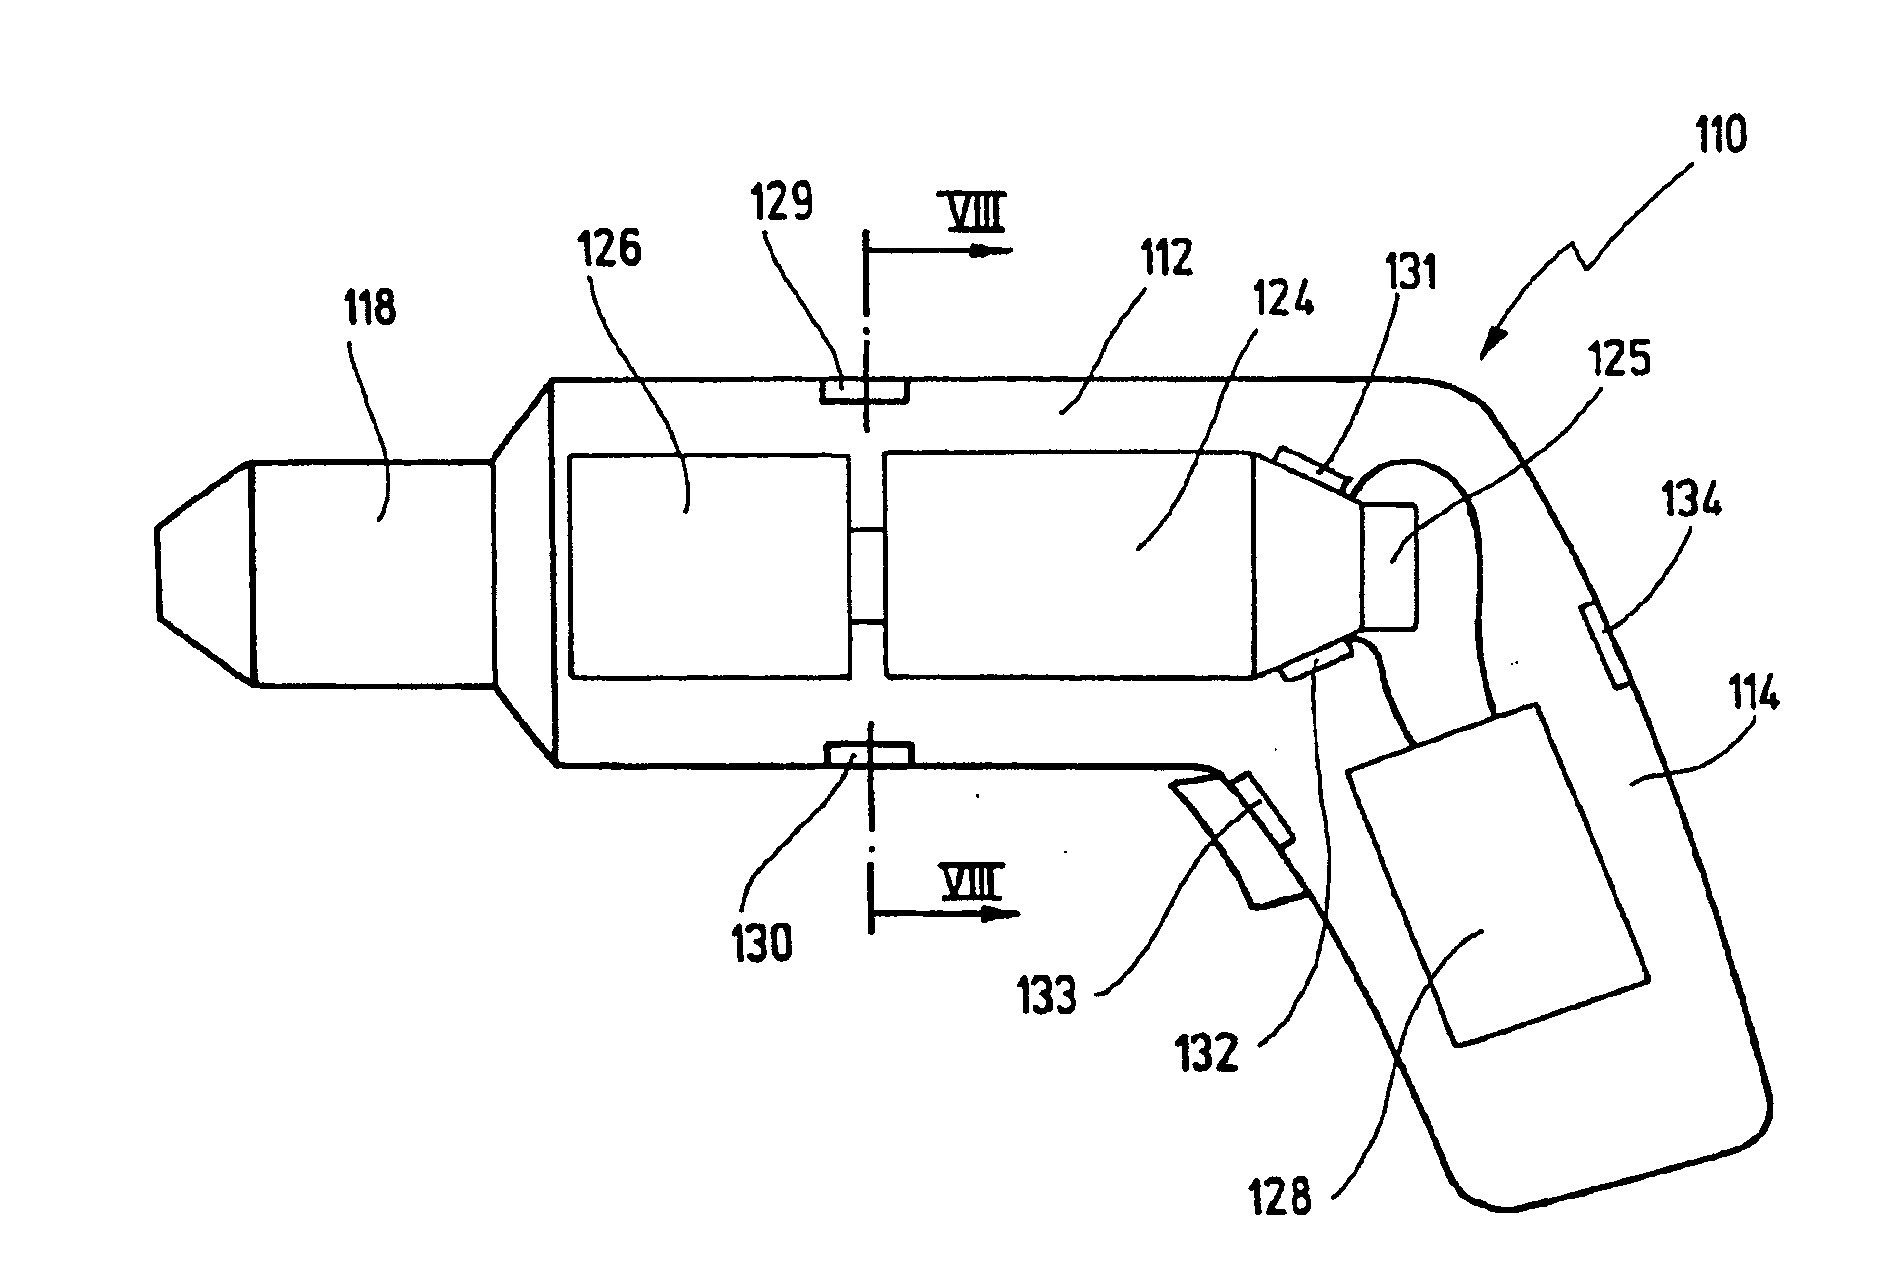 Hand-held power tool with damping system